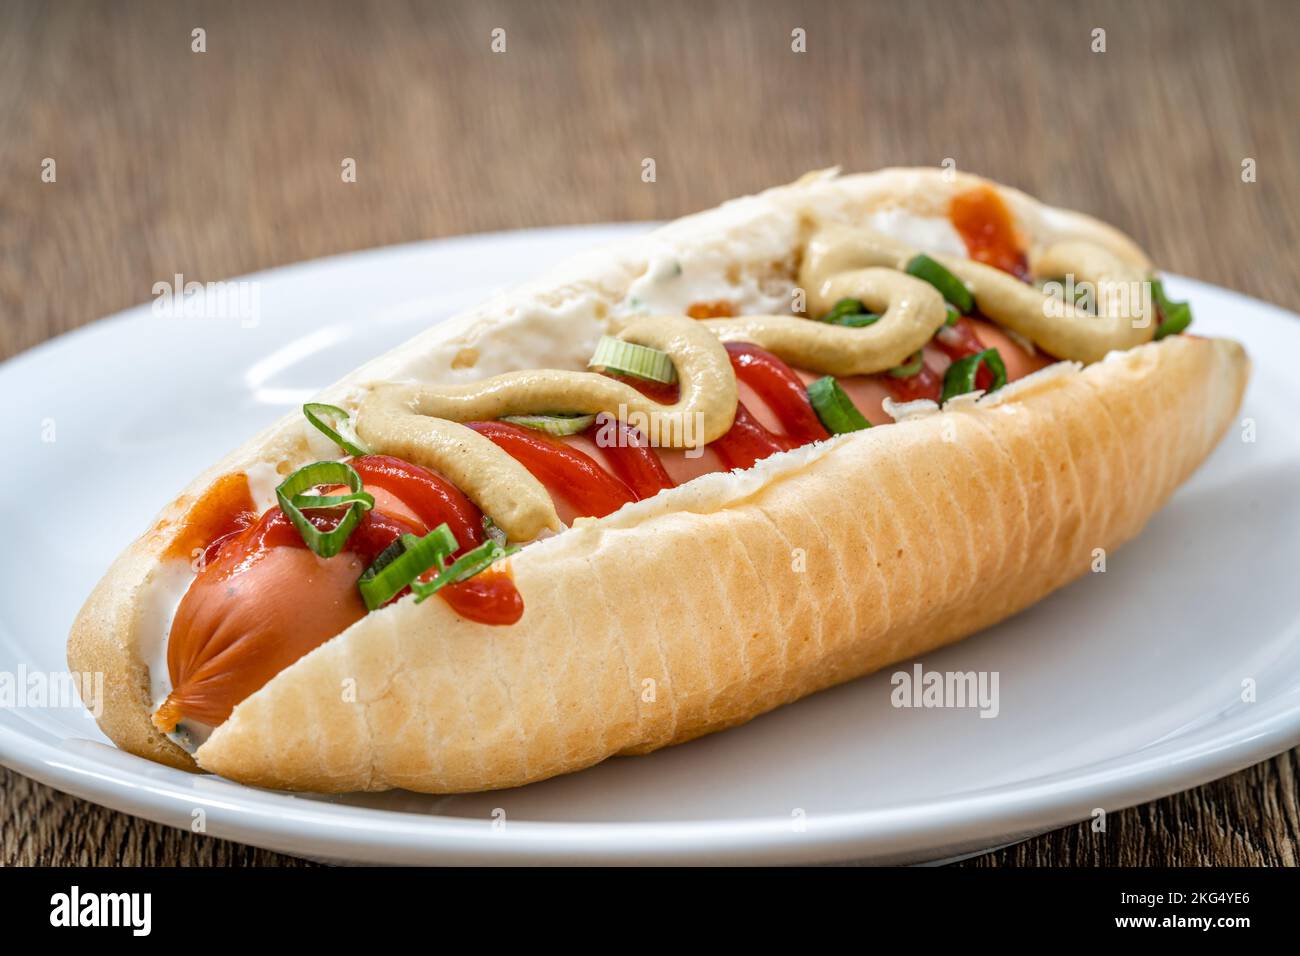 hot dog with mustard ketchup and spring onion Stock Photo